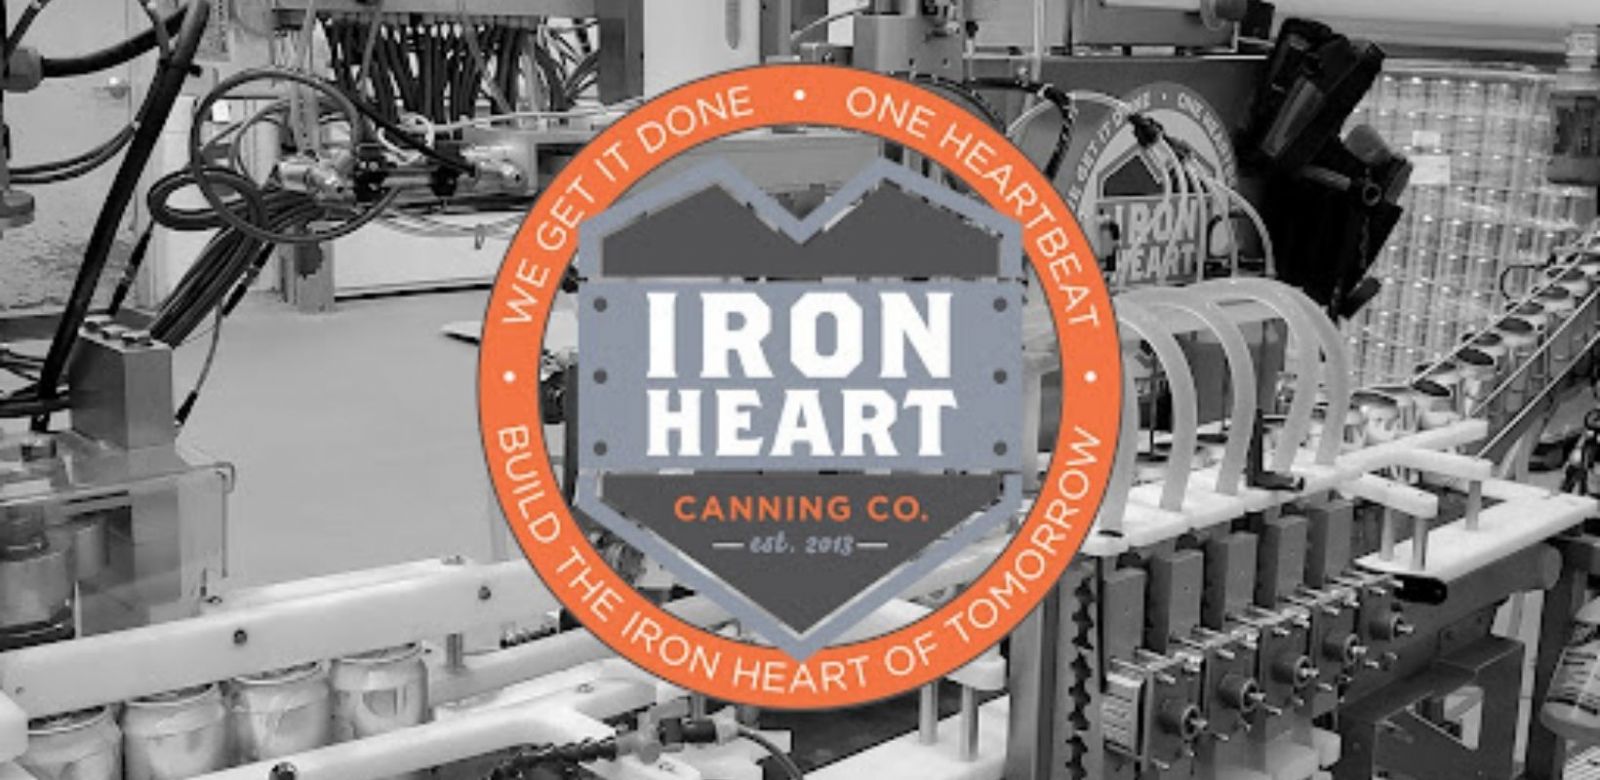 Photo for: Iron Heart Canning is Exhibiting at the Cannabis Drinks Expo